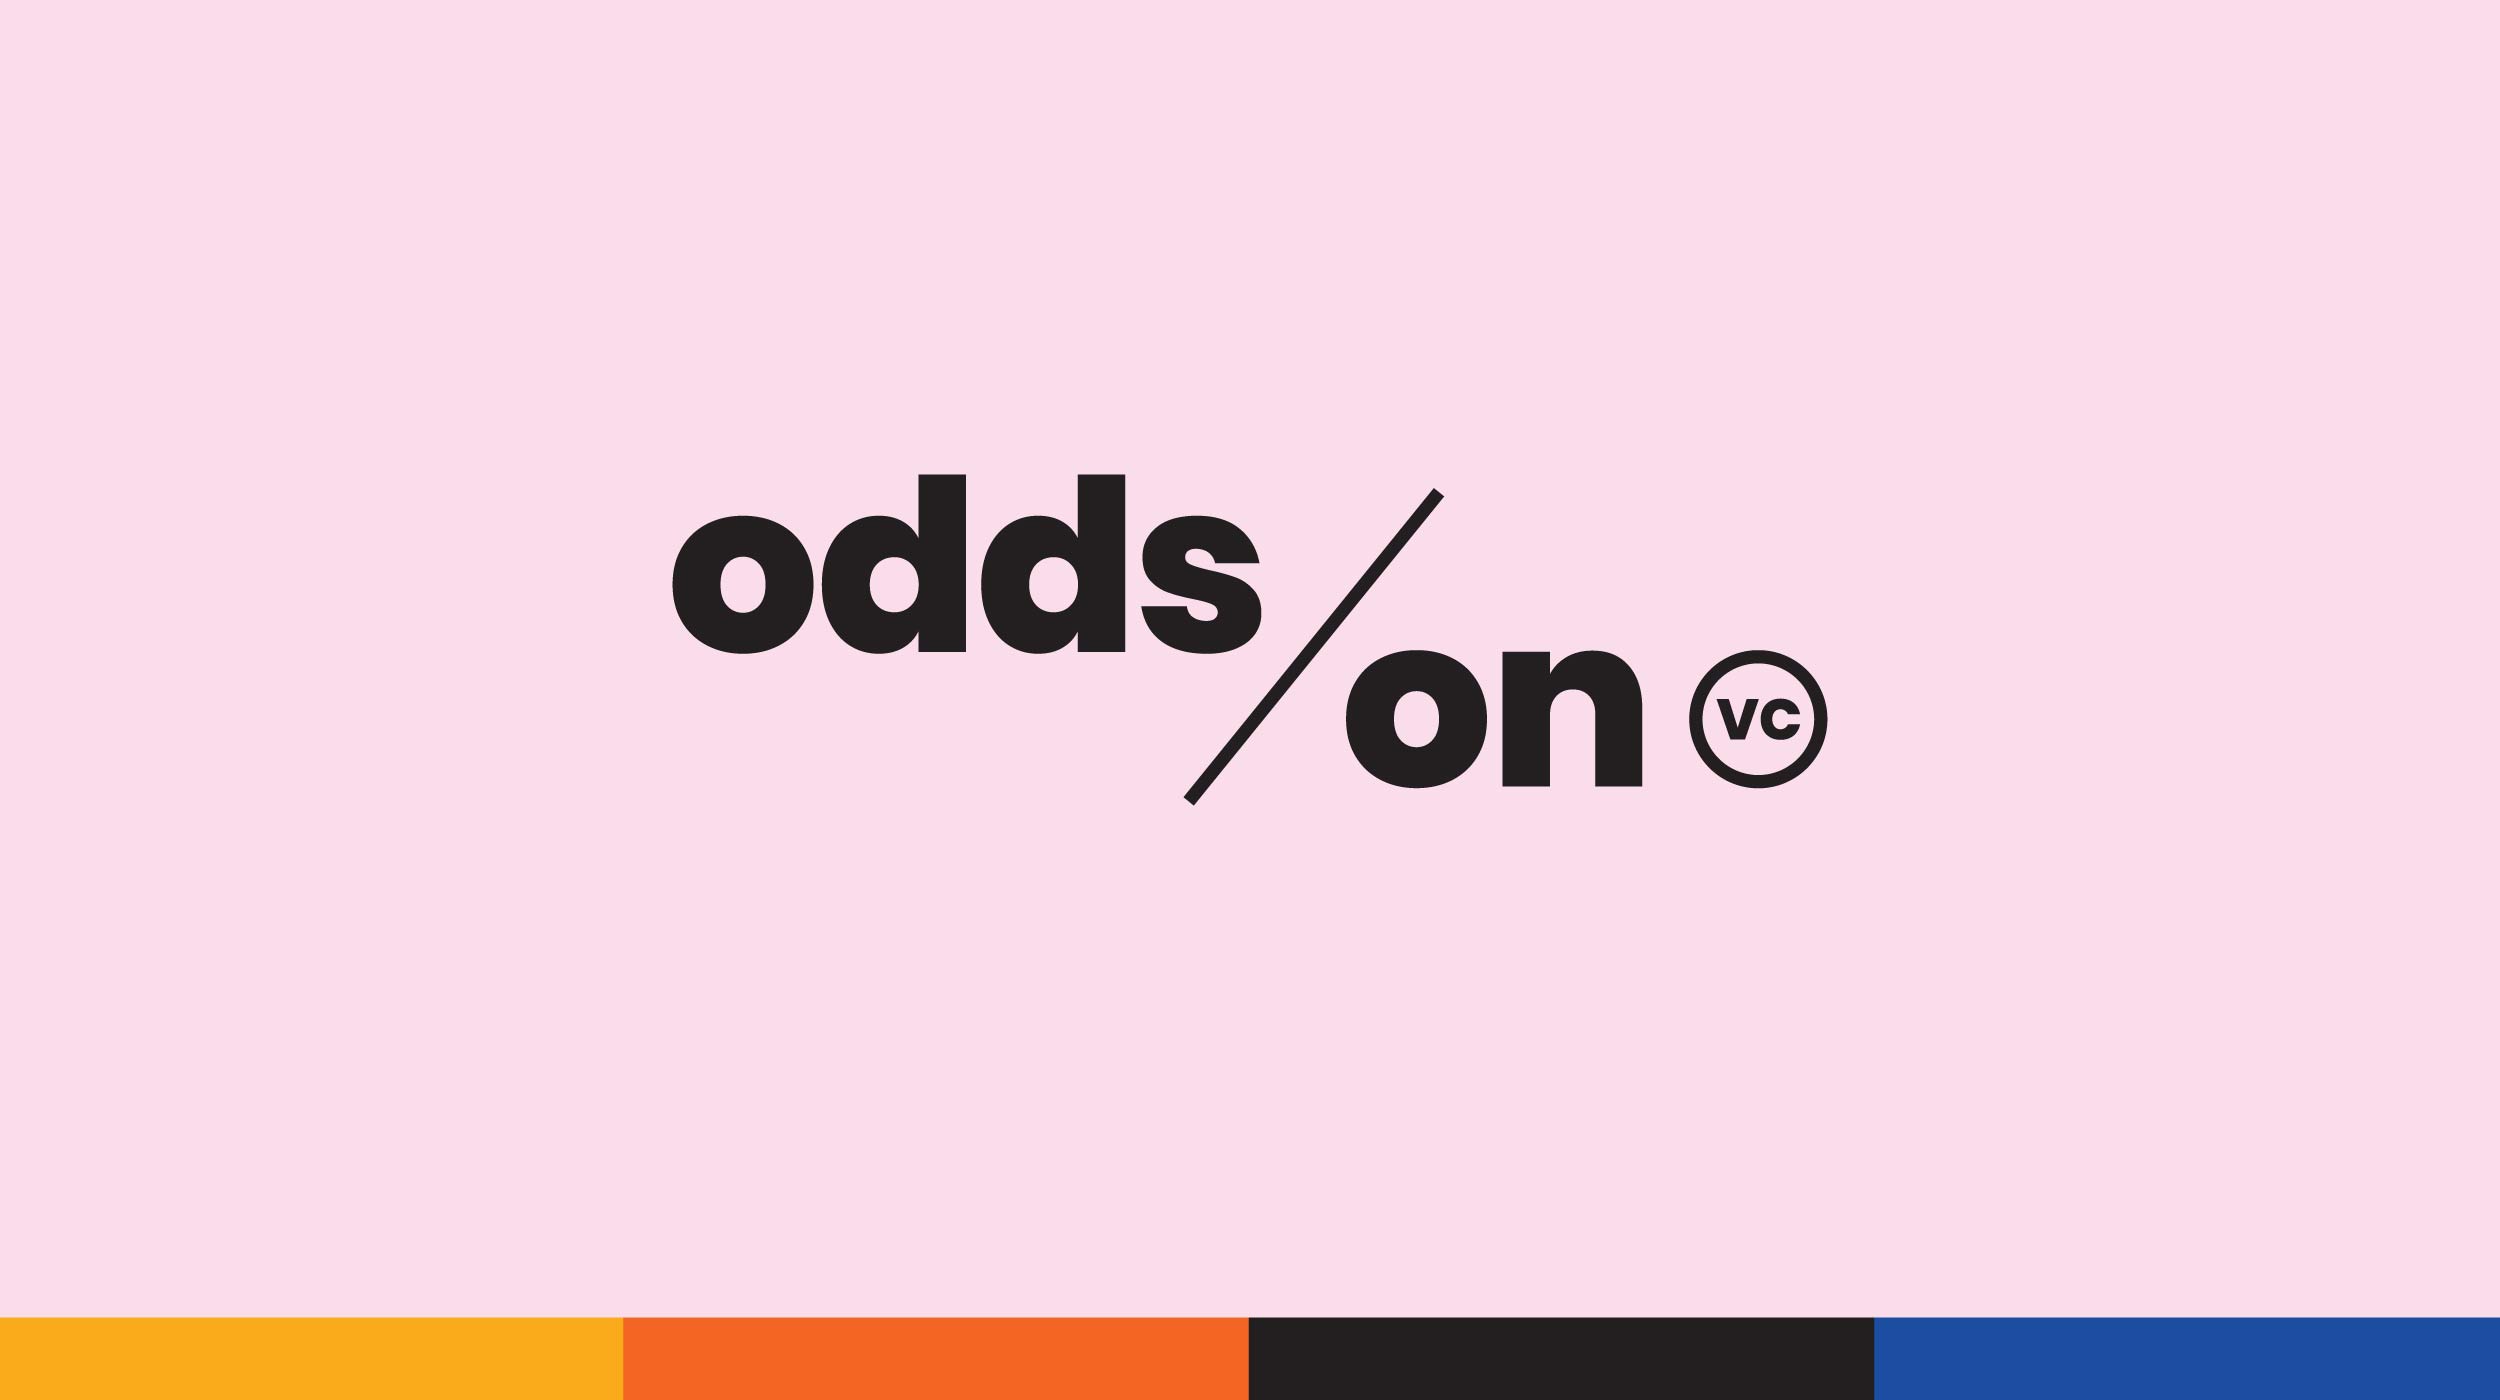 Odds On VC logo and color palette